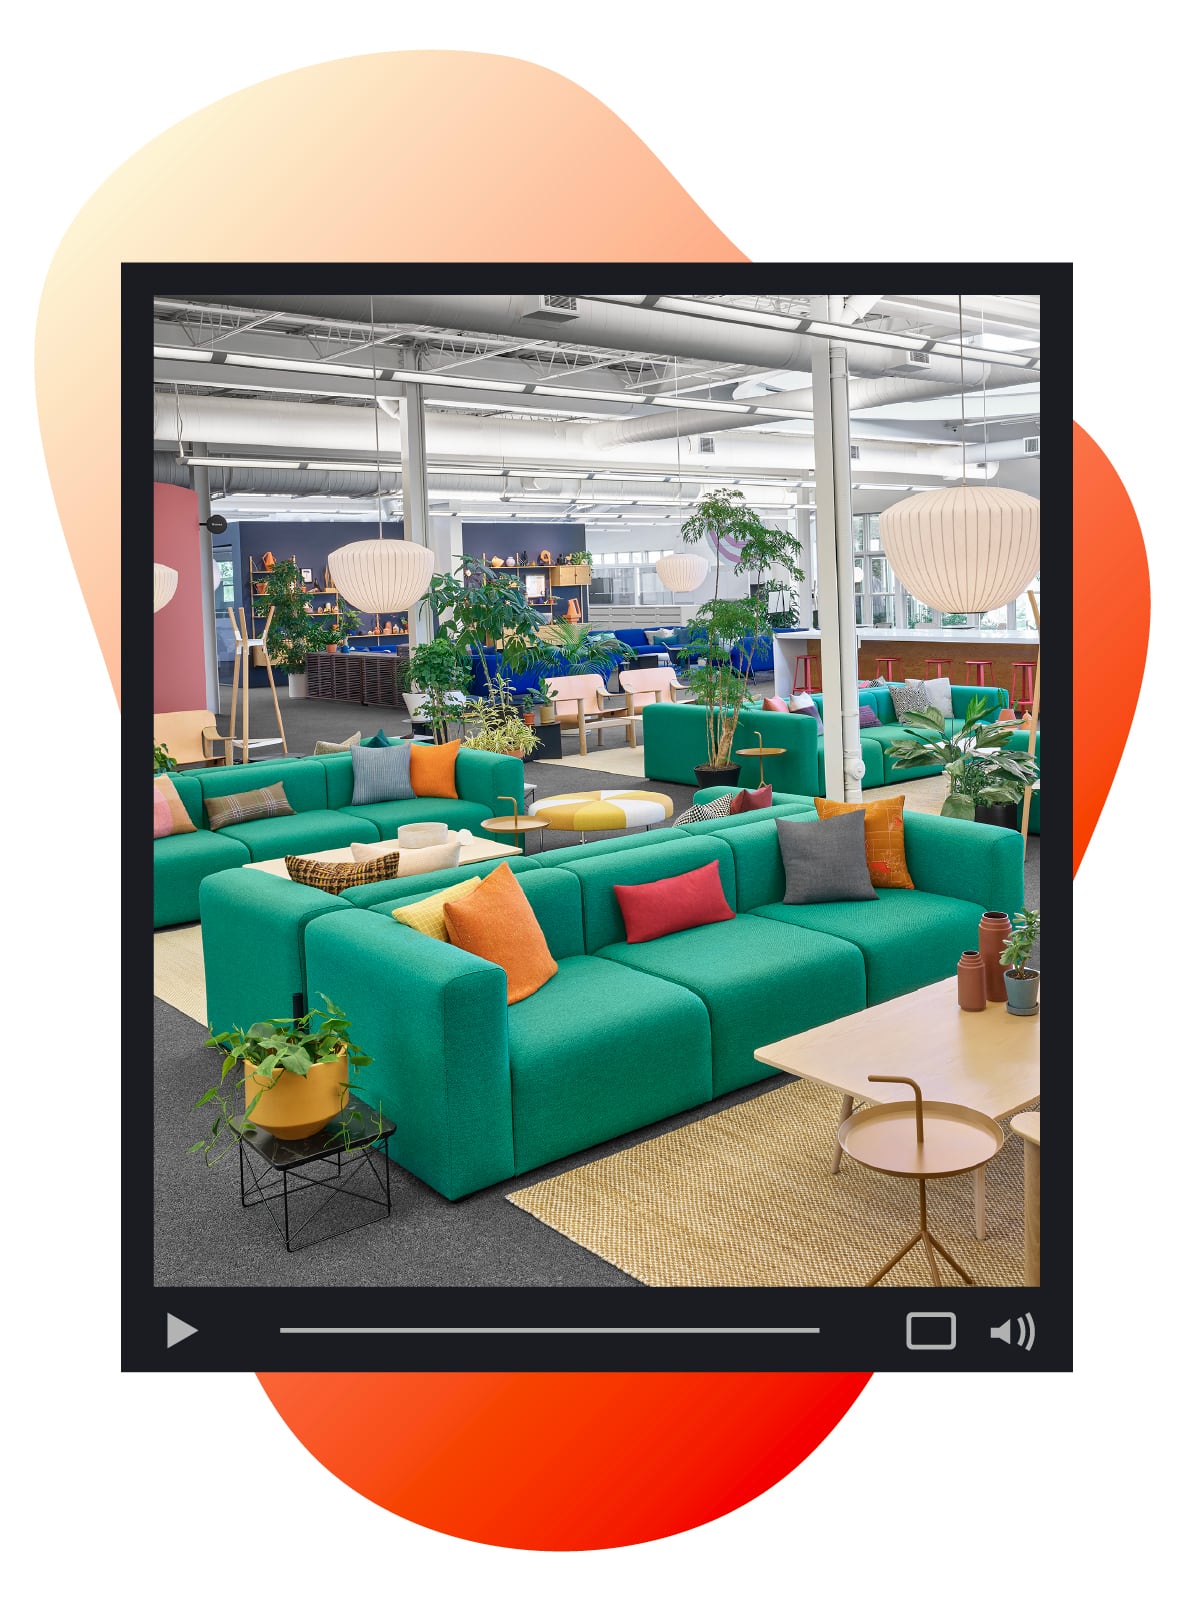 The transformed Front Door of Herman Miller's Design Yard in West Michigan with a colorful mix of furnishings from across the MillerKnoll family of brands. An orange organic shape sits behind the image.